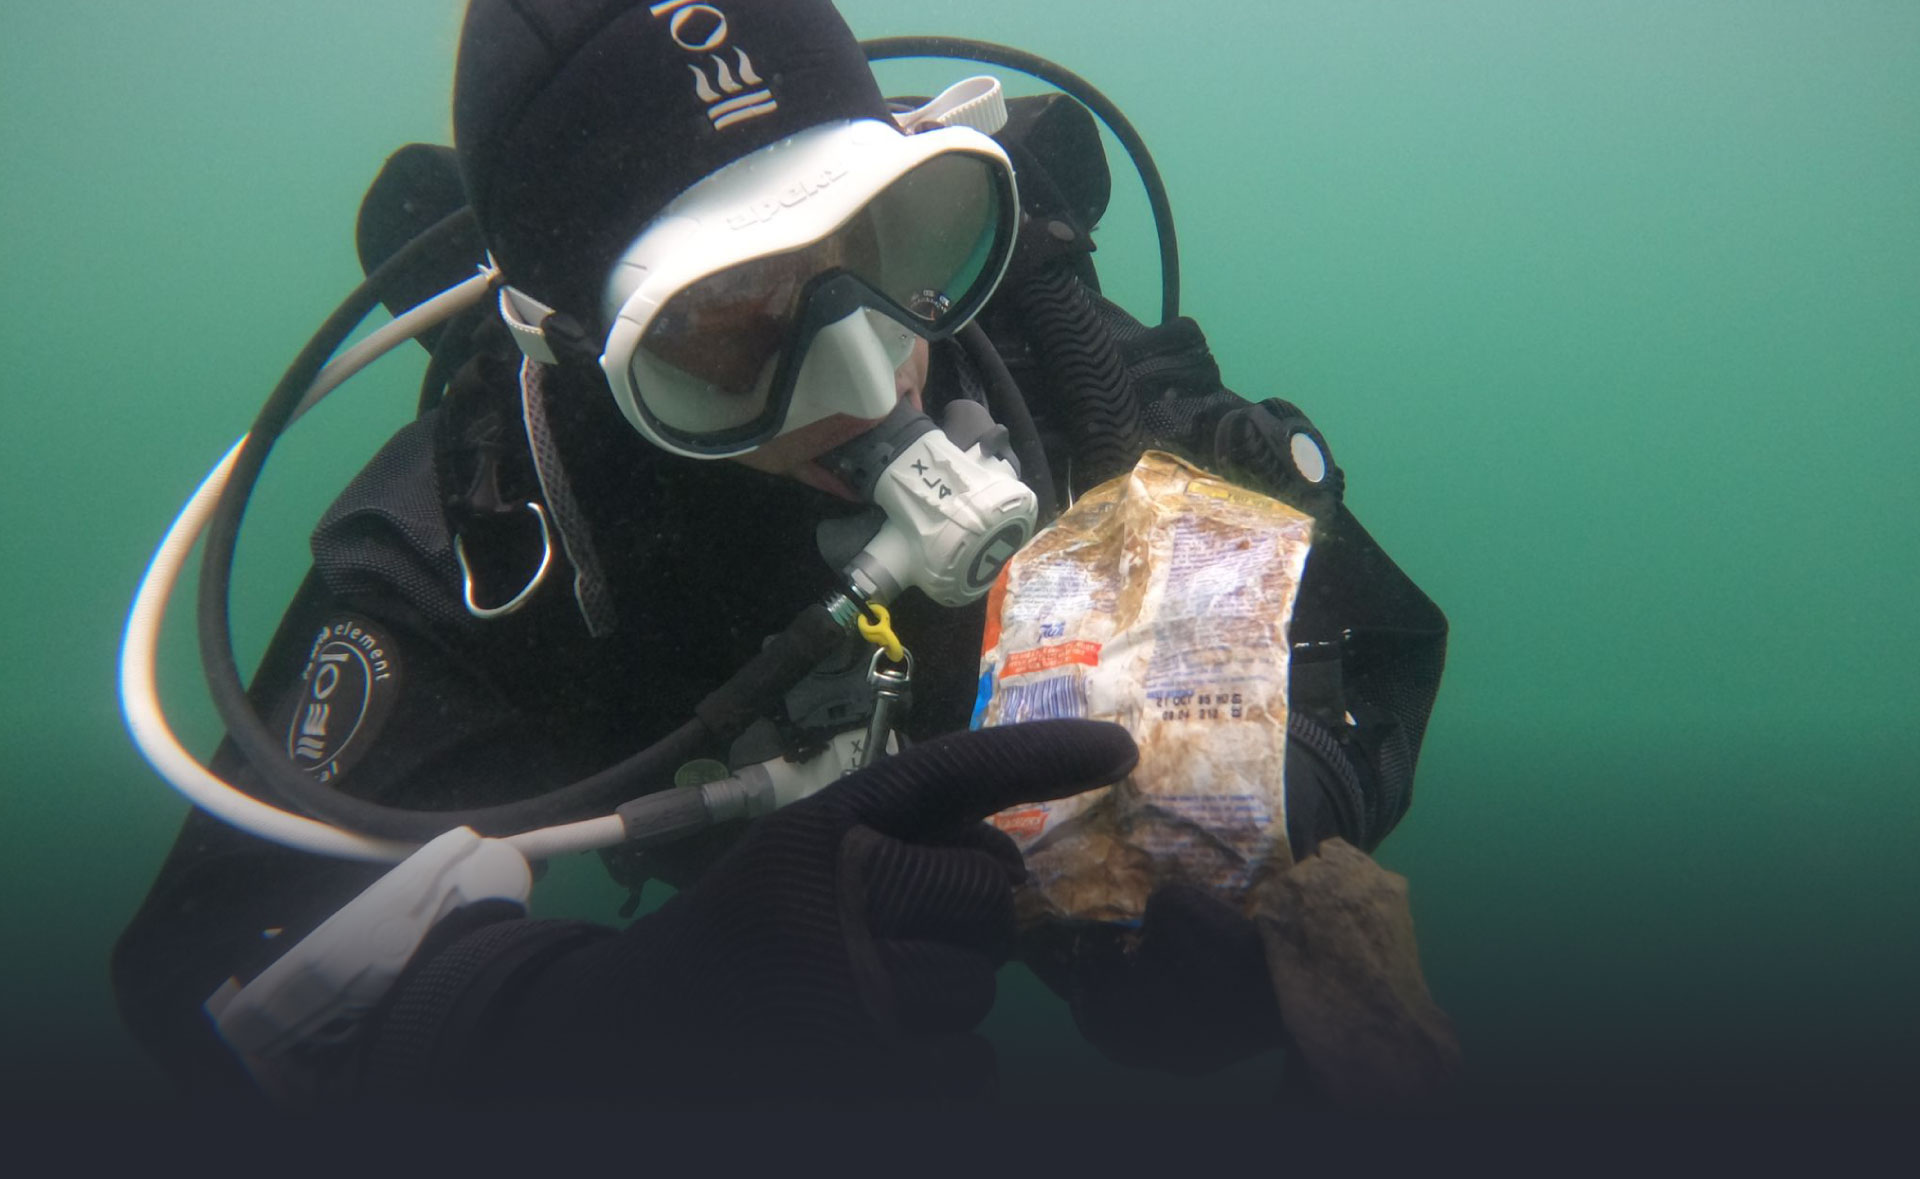 A diver removing litter from the ocean during marine biology dive training